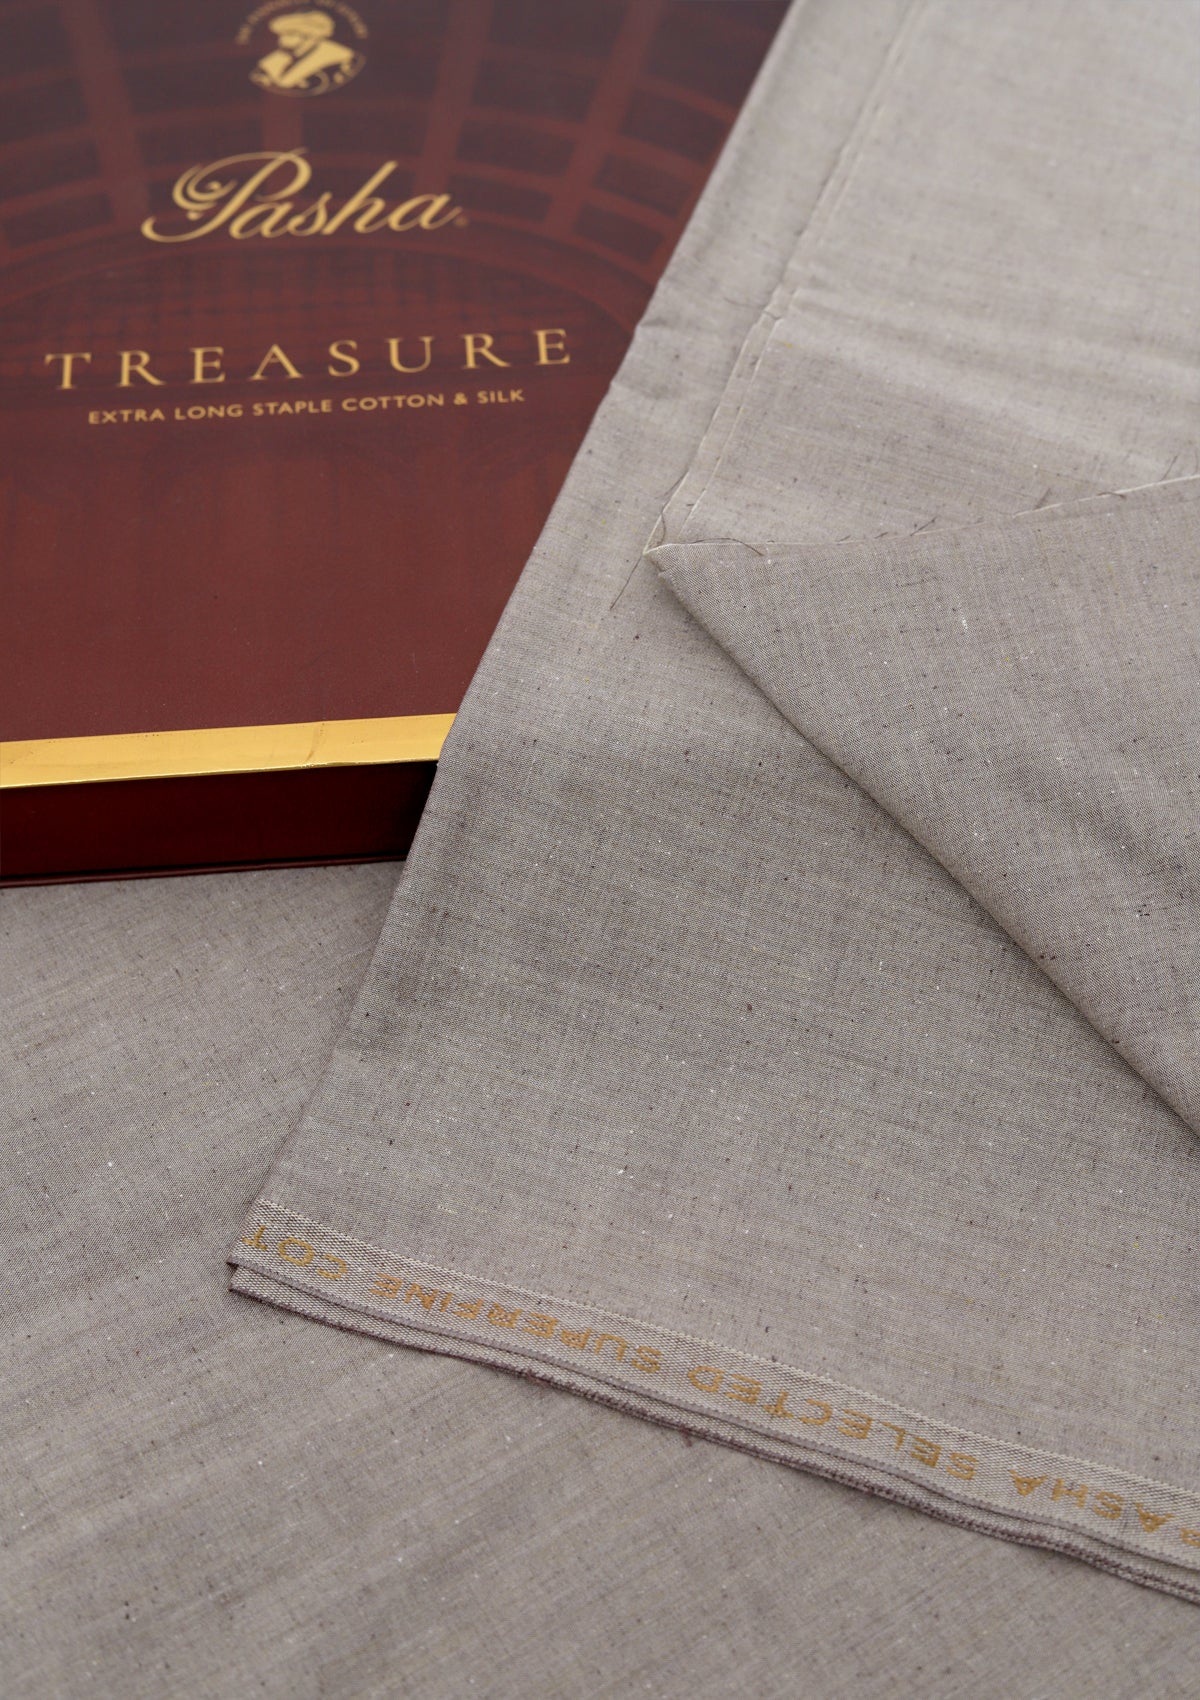 Pasha Treasure Superfine Color#073 (S Brown) available at Saleem Fabrics Traditions